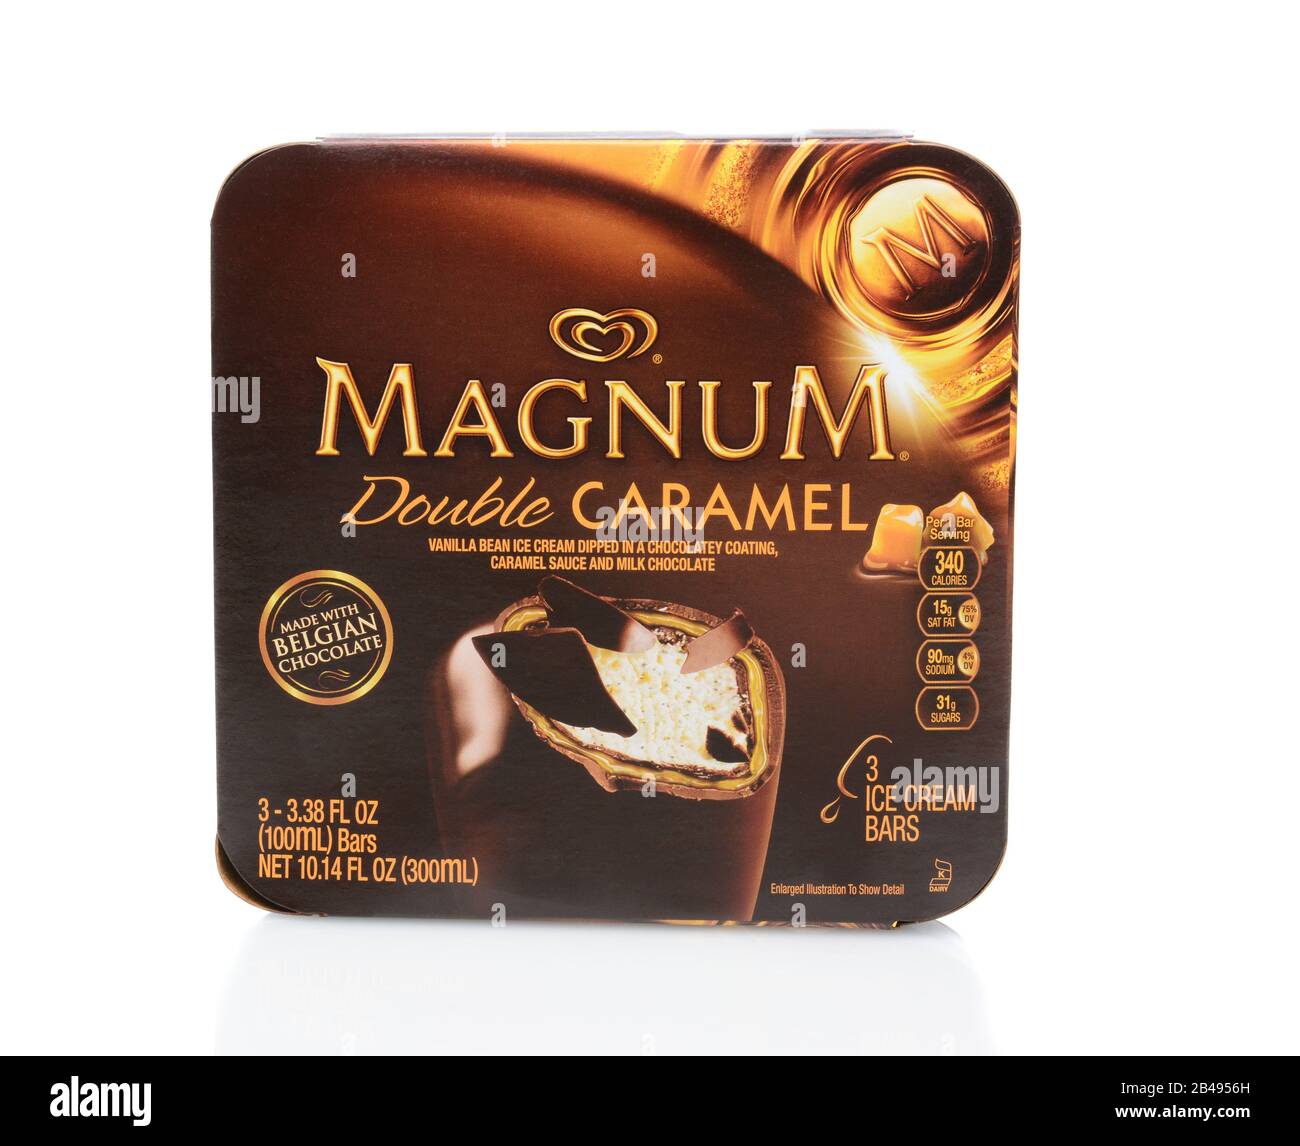 IRVINE, CA - SEPTEMBER 15, 2014: A box of Magnum Double Caramel Ice Cream Bars. Launched in Sweden in 1989 as an upscale ice cream for the Nogger bran Stock Photo